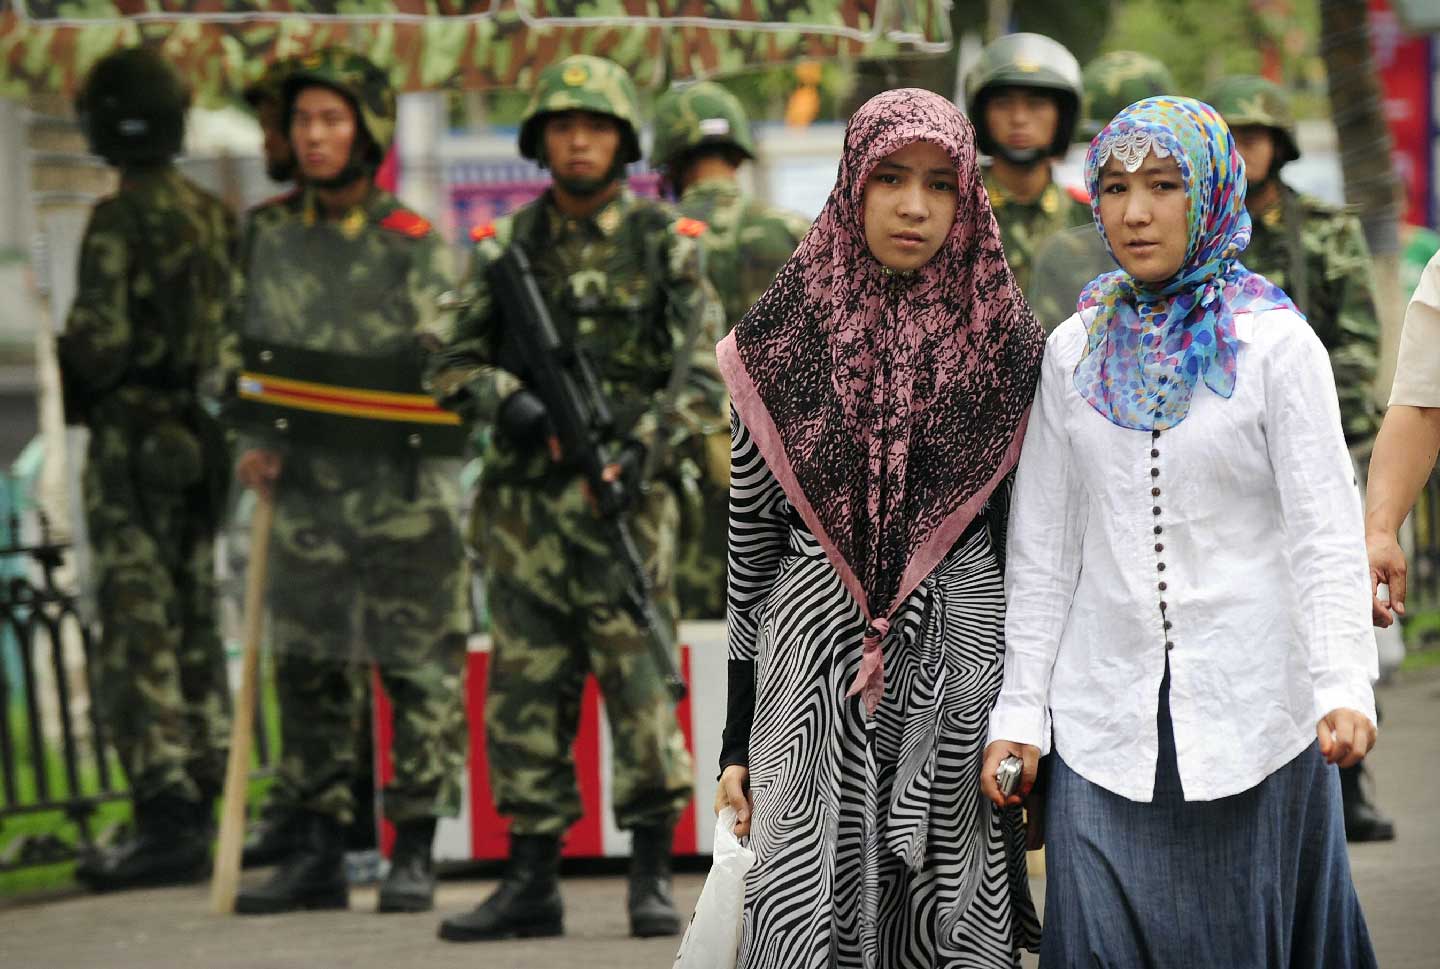 Two ethnic Uighur women pass Chinese paramilitary policemen standing guard outside the Grand Bazaar in the Uighur district of the city of Urumqi in China's Xinjiang region on July 14, 2009. (Peter Parks/AFP/Getty Images)